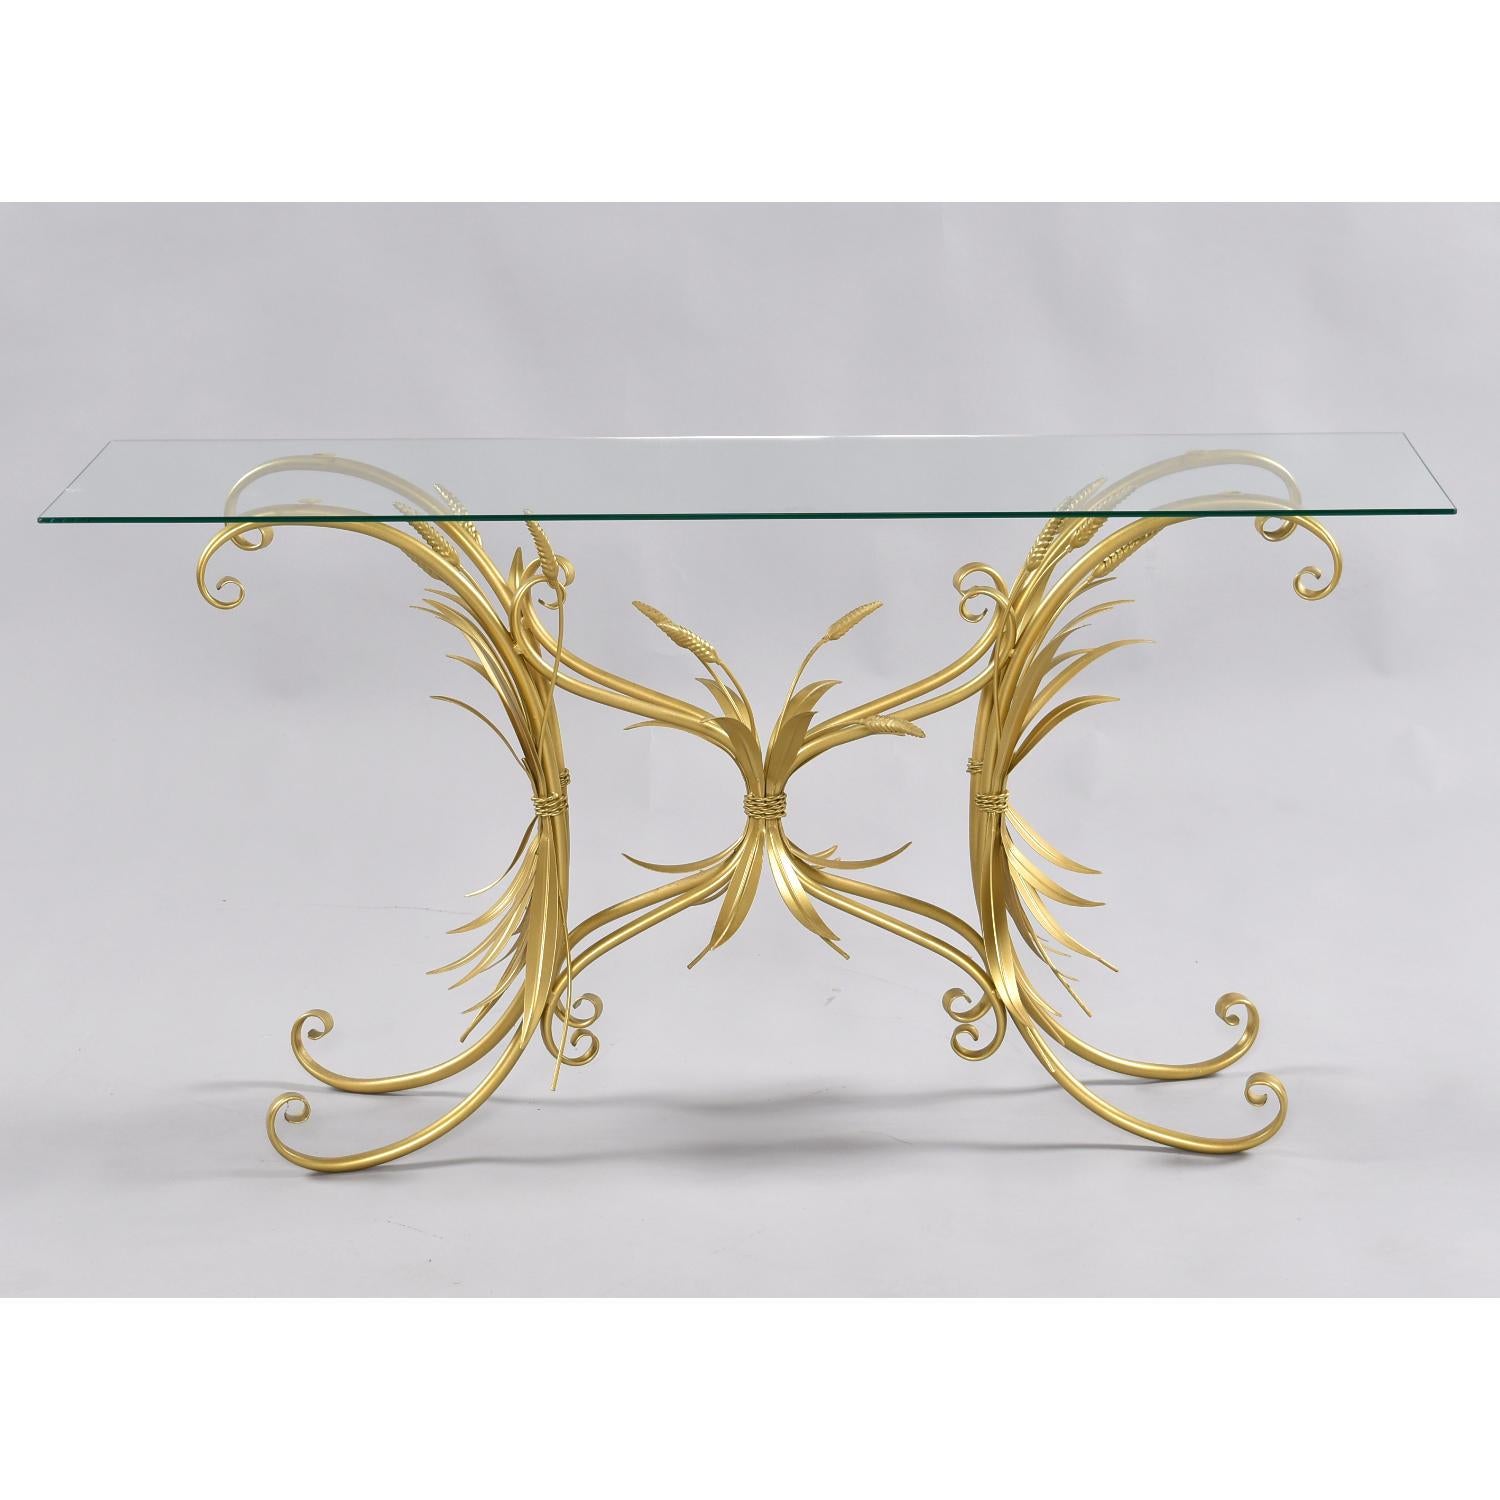 Restored Vintage Gilded Wheat Sheaf Tole Sofa Table with New Glass In Excellent Condition For Sale In Chattanooga, TN